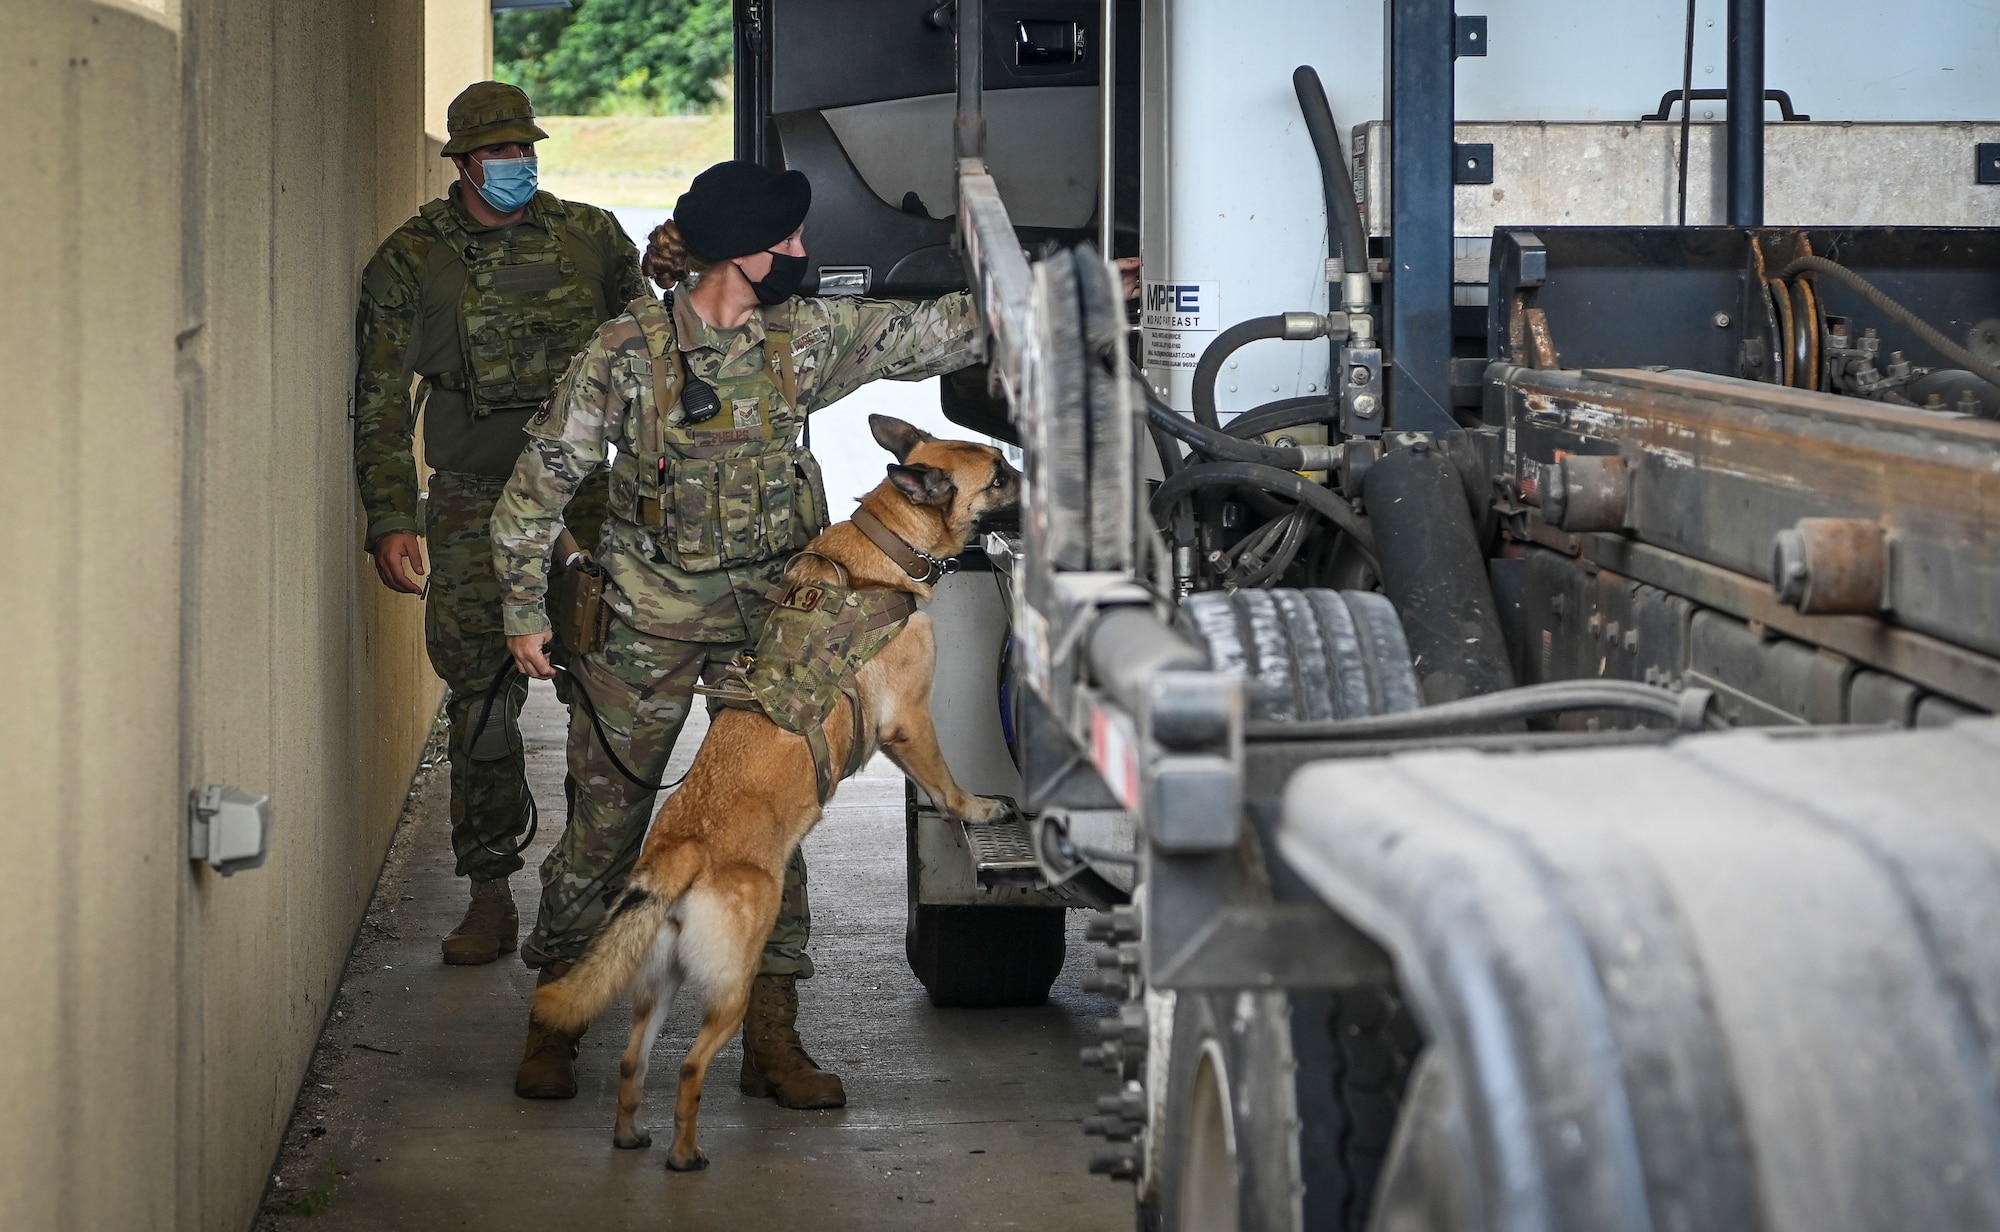 U.S. Air Force and Royal Australian Air Force personnel search vehicles at the vehicle inspection facility during Cope North 22 on Andersen Air Force Base, Guam, Feb. 15, 2022.